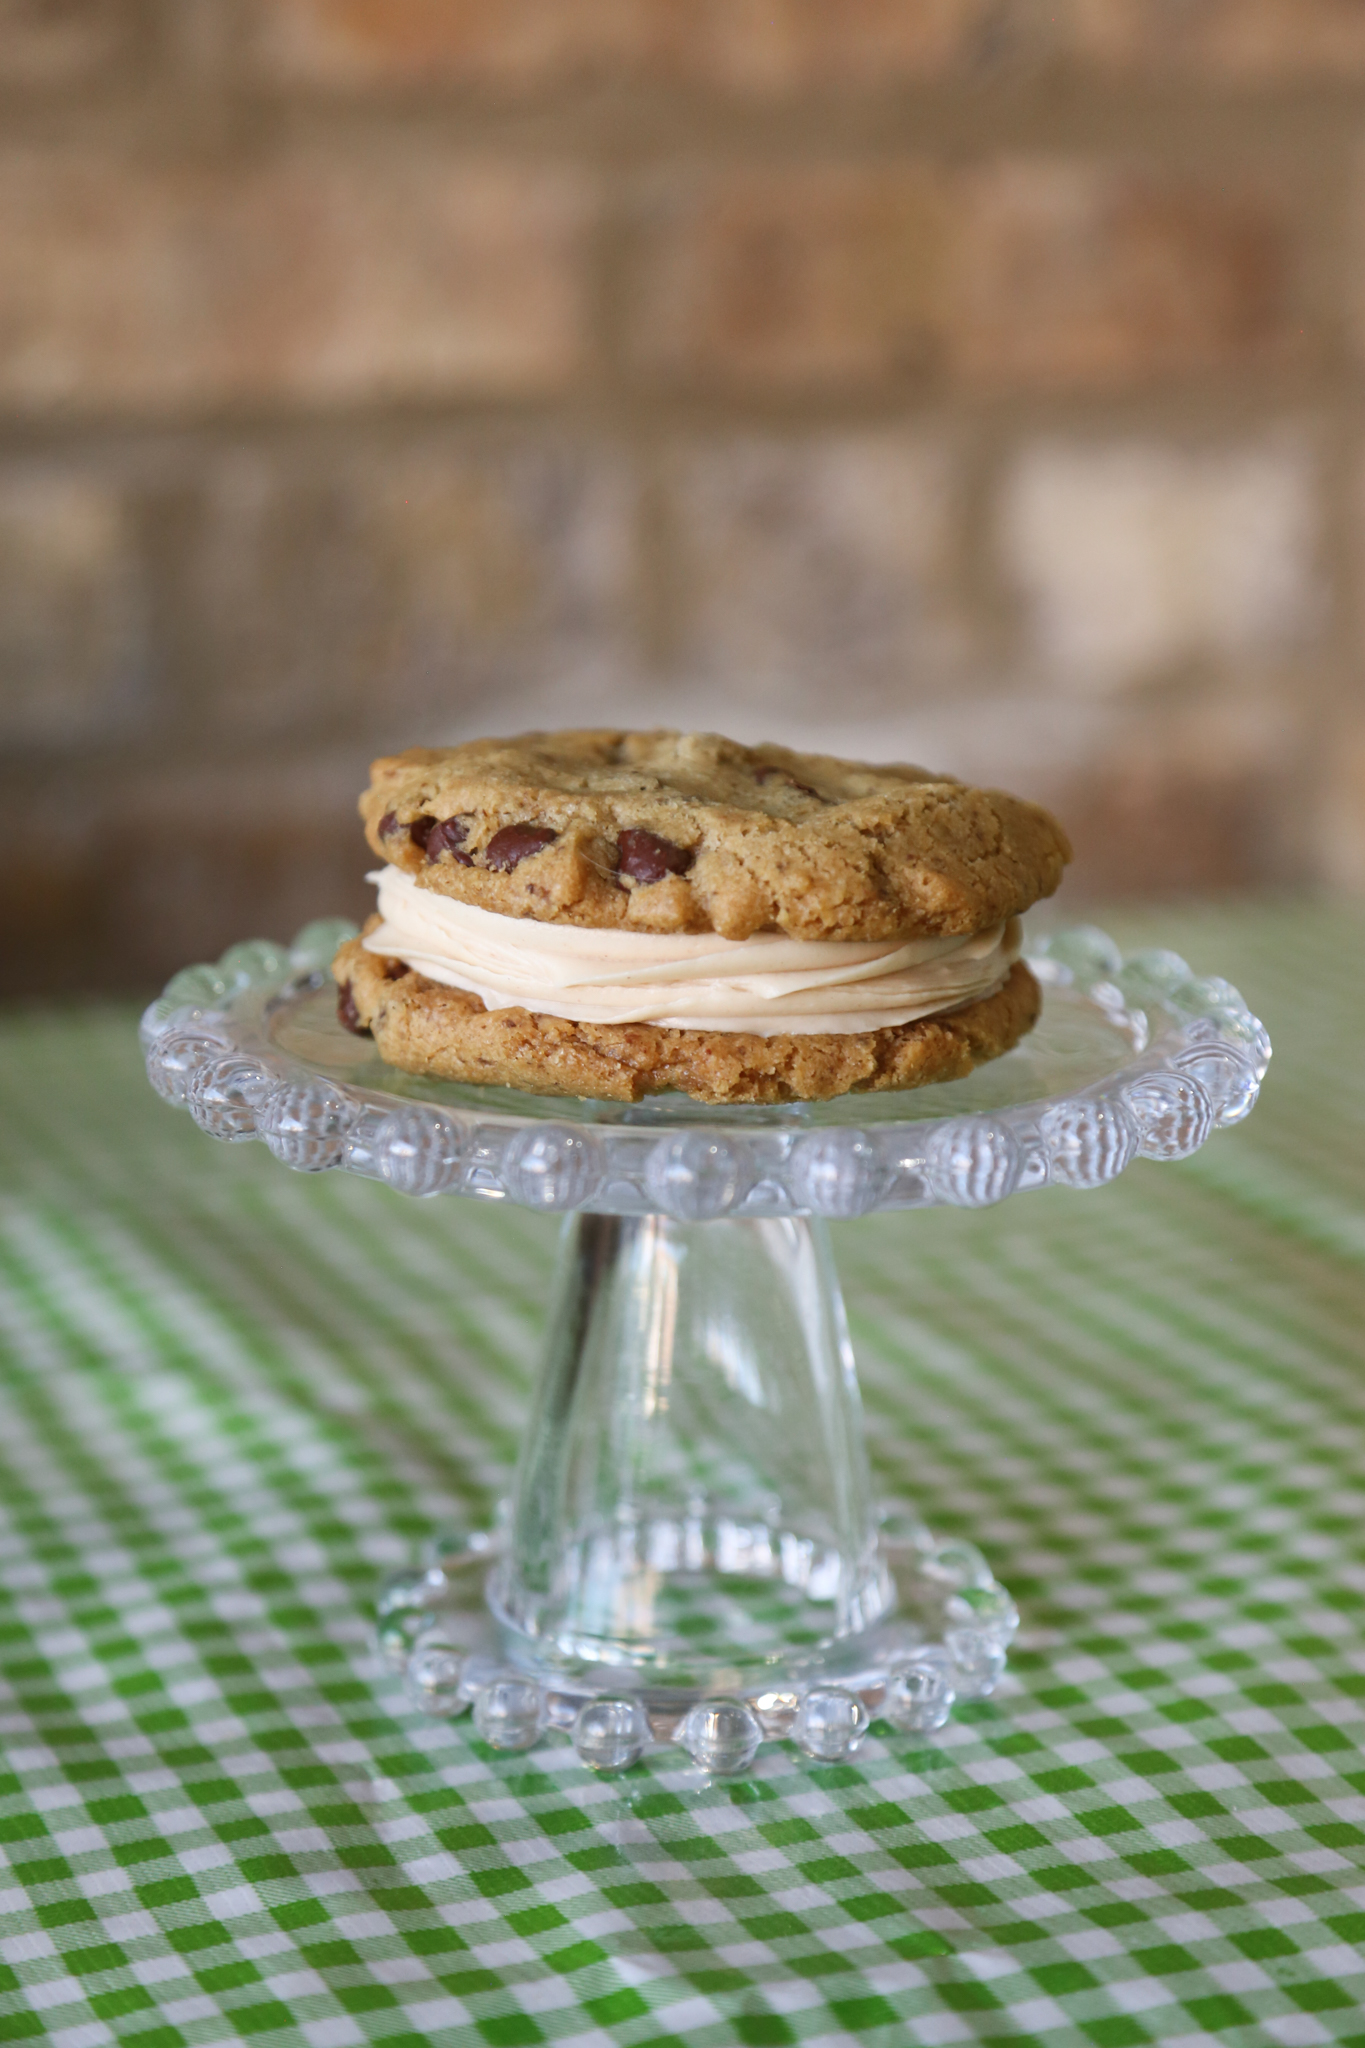 Vegan Chocolate Chip Cookie with Buttercream